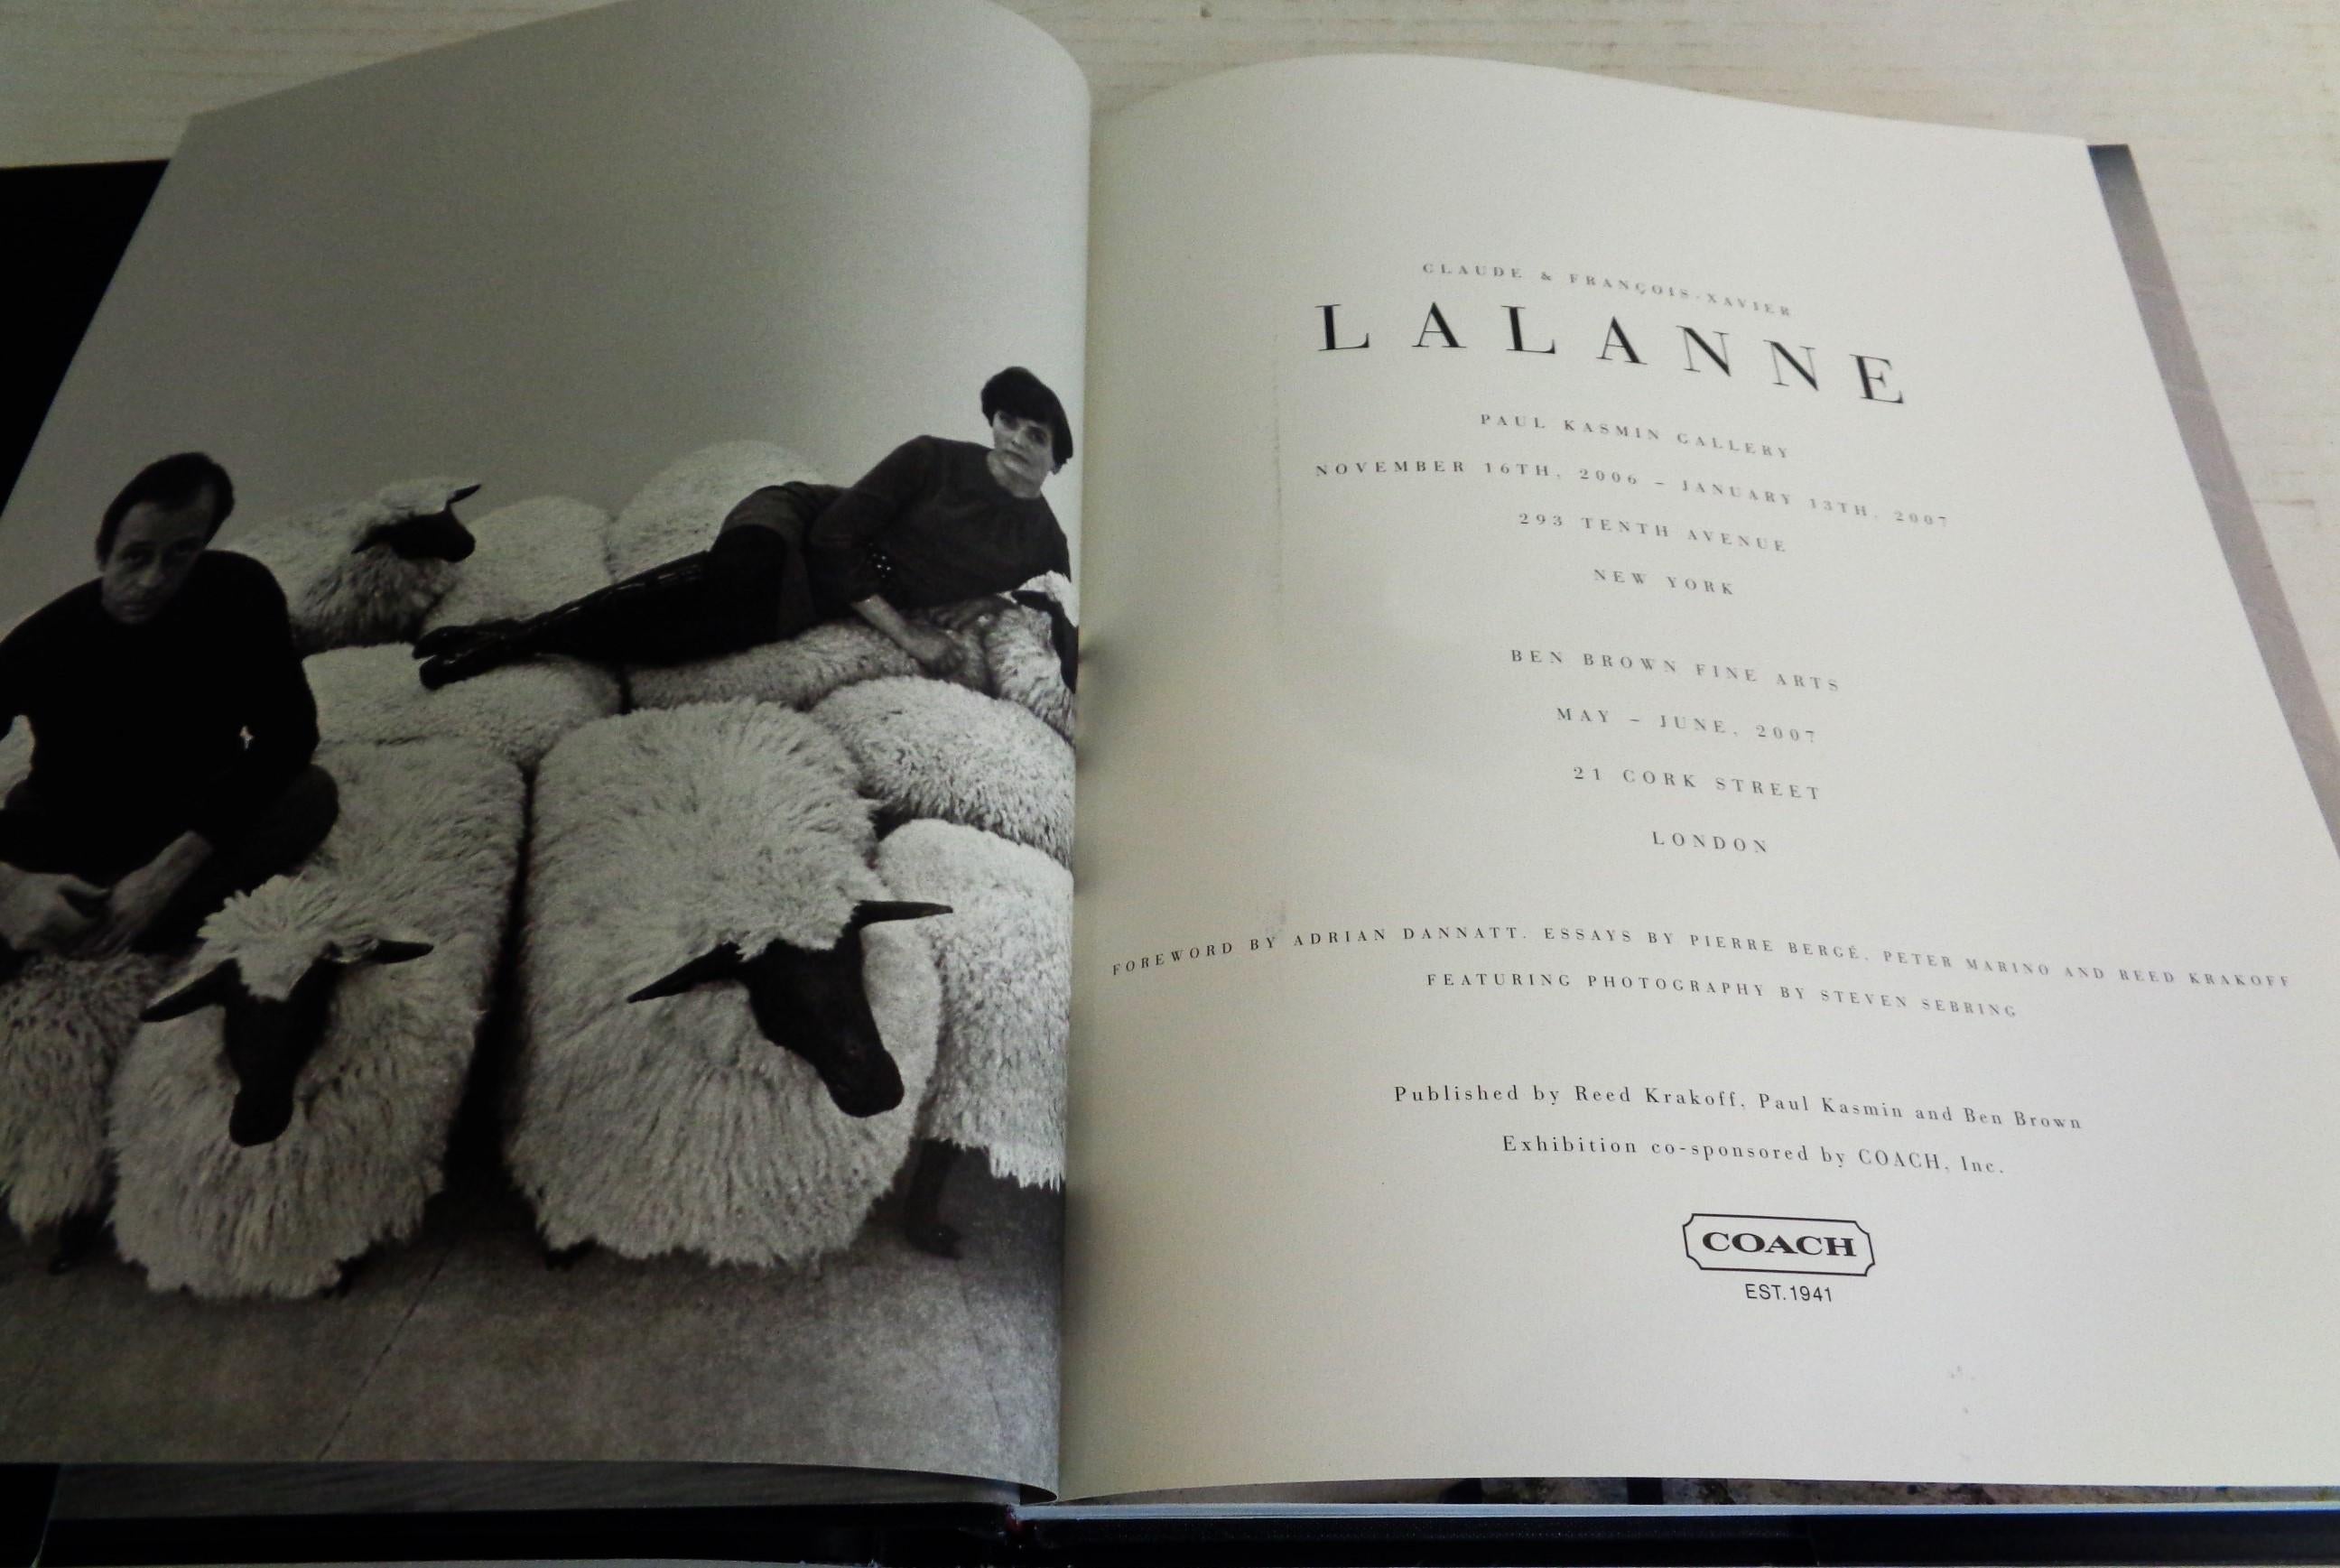 Claude & Francoise - Xavier Lalanne: 2006 Krakoff, Kasmin, Brown - 1st Edition  In Good Condition For Sale In Rochester, NY